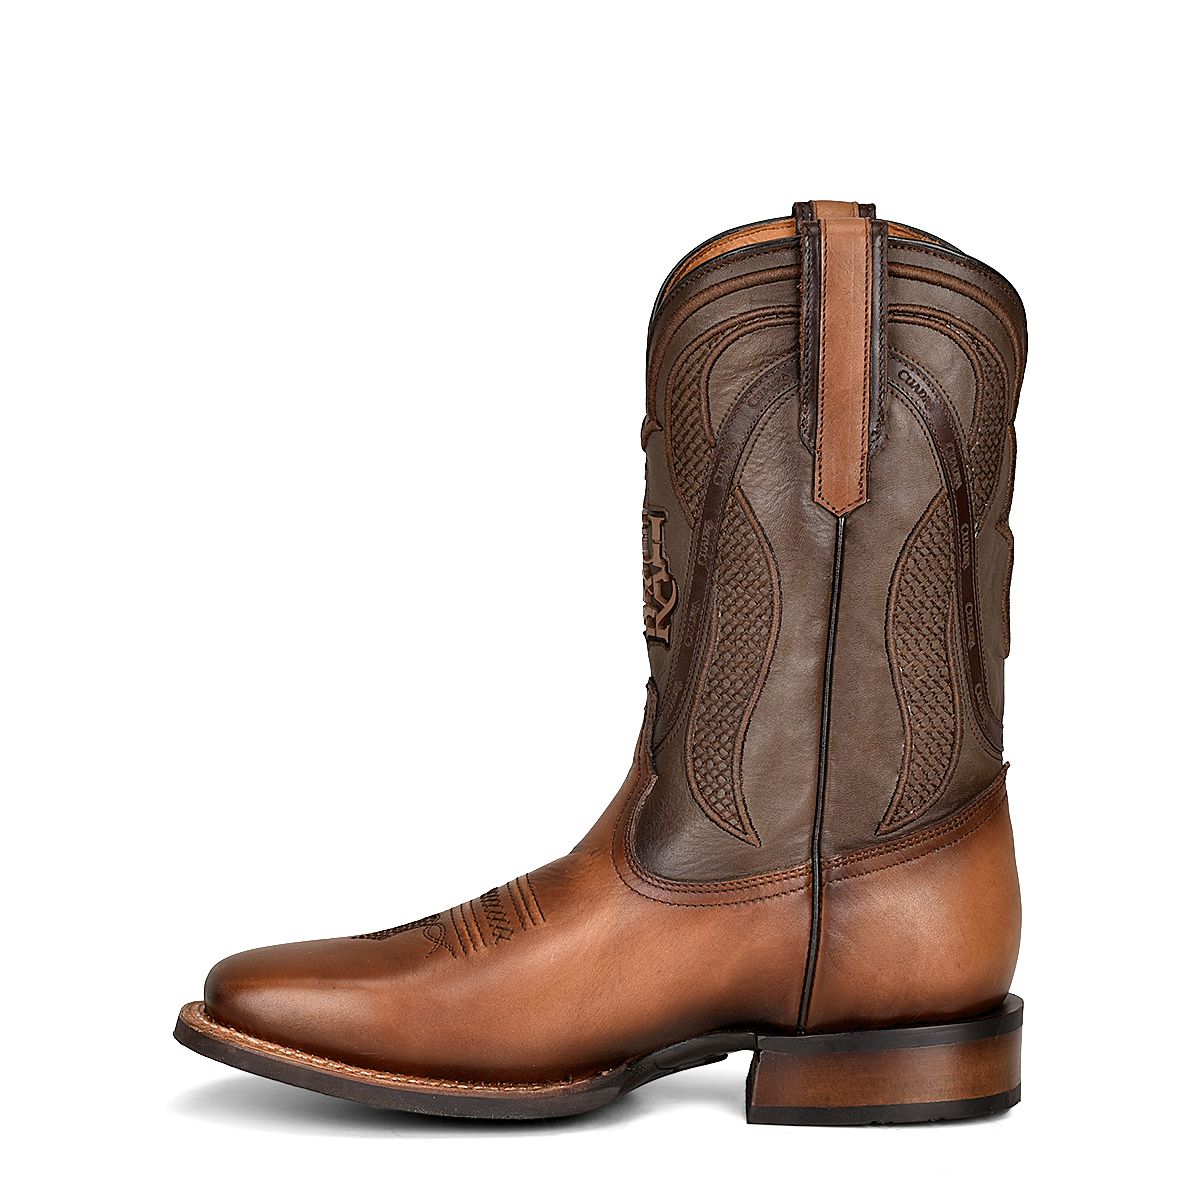 Rodeo cowboy honey brown leather boots